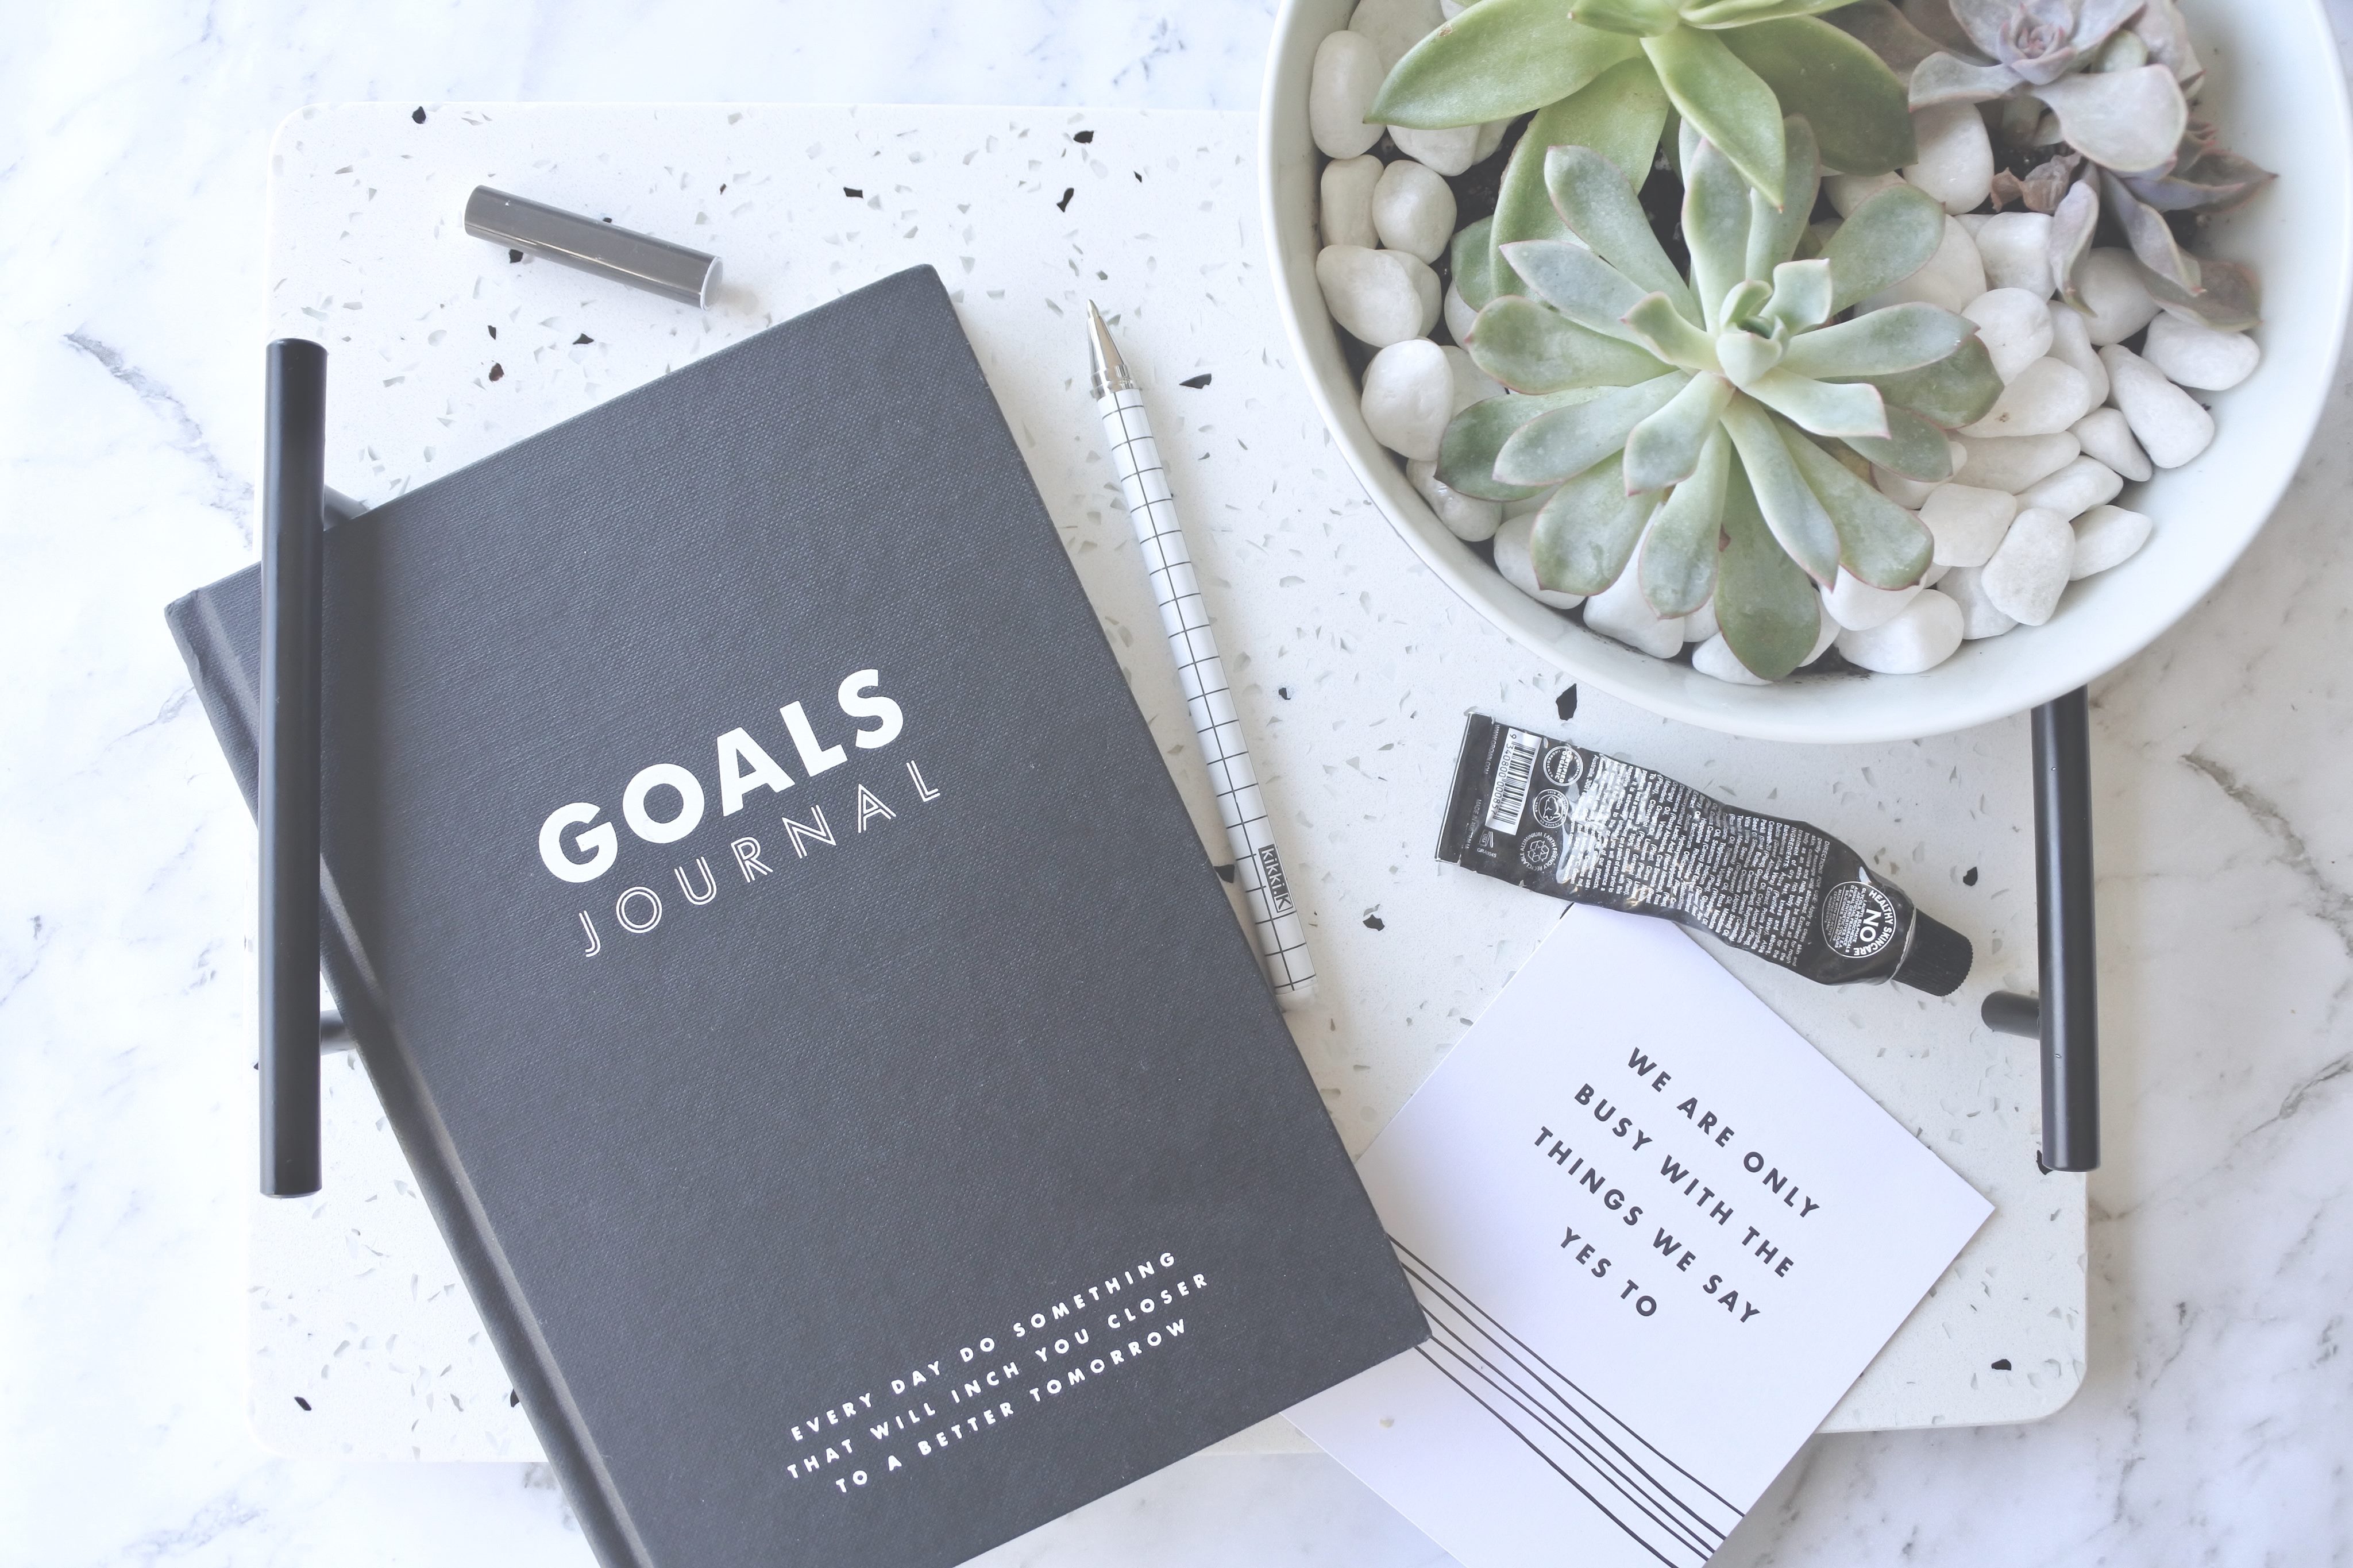 It's so easy to jump into goals without thinking about the essentials and laying down the foundations. But as a driven goal-getter (and lousy goal-achiever!) I'm ready to change all that by learning how to create achievable goals from the get-go. Are you with me?